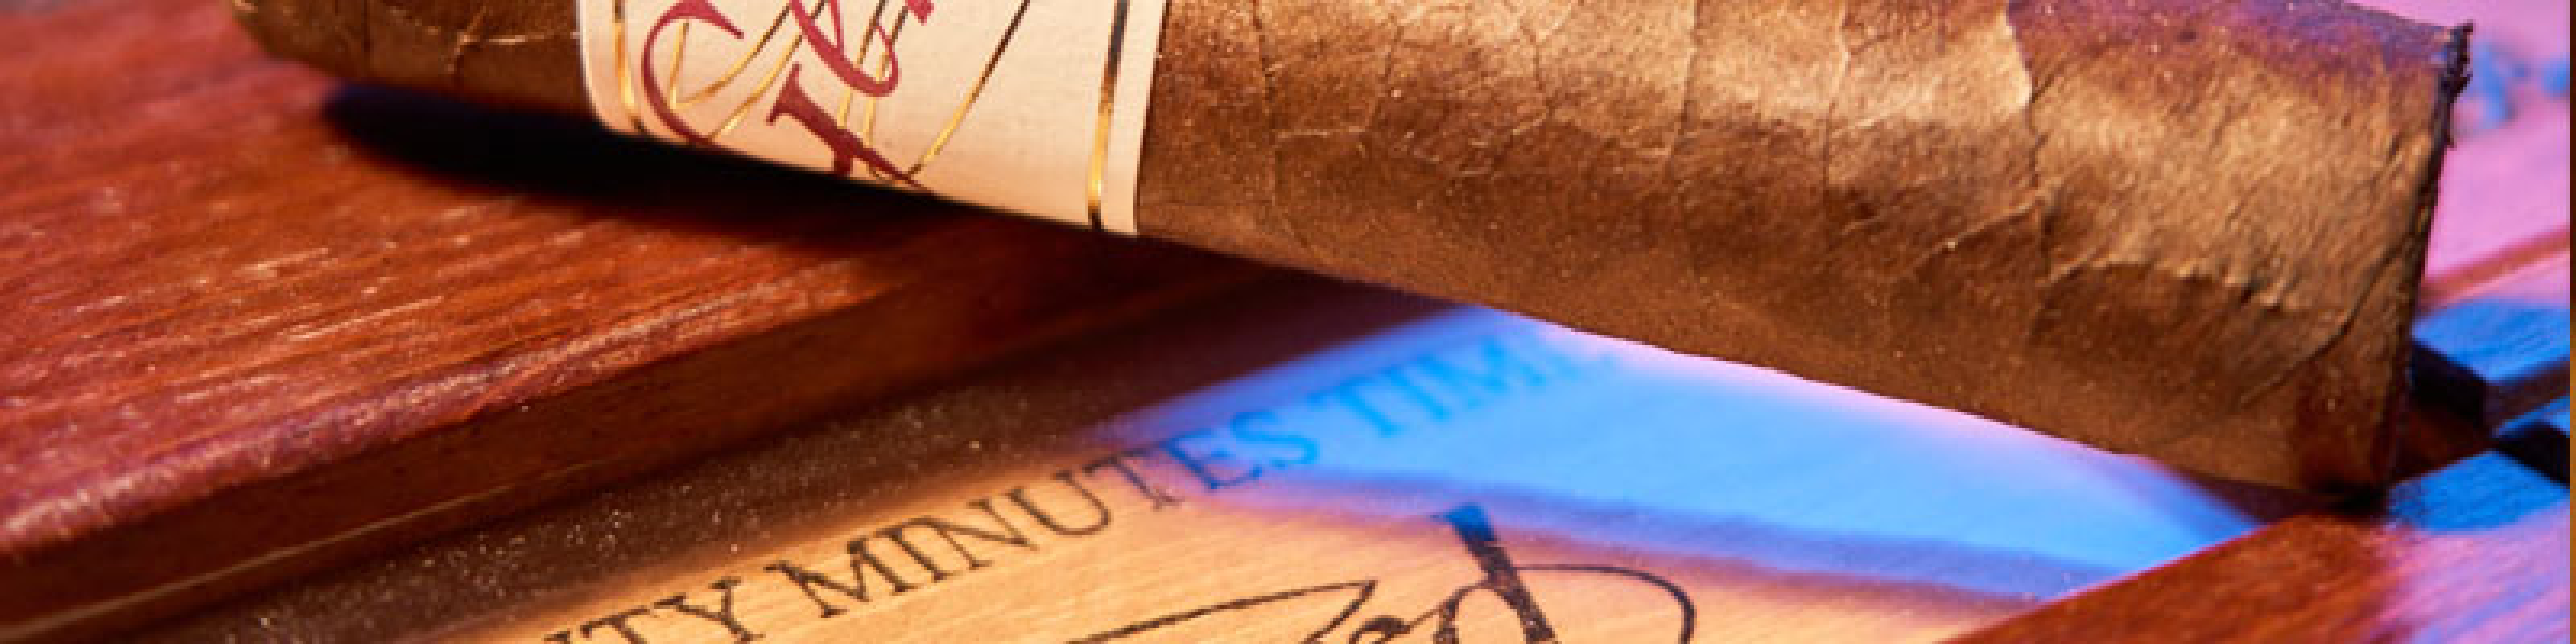 WHERE FIND CIGARS GERARD-GENEVE: FOR ALL SMOKERS